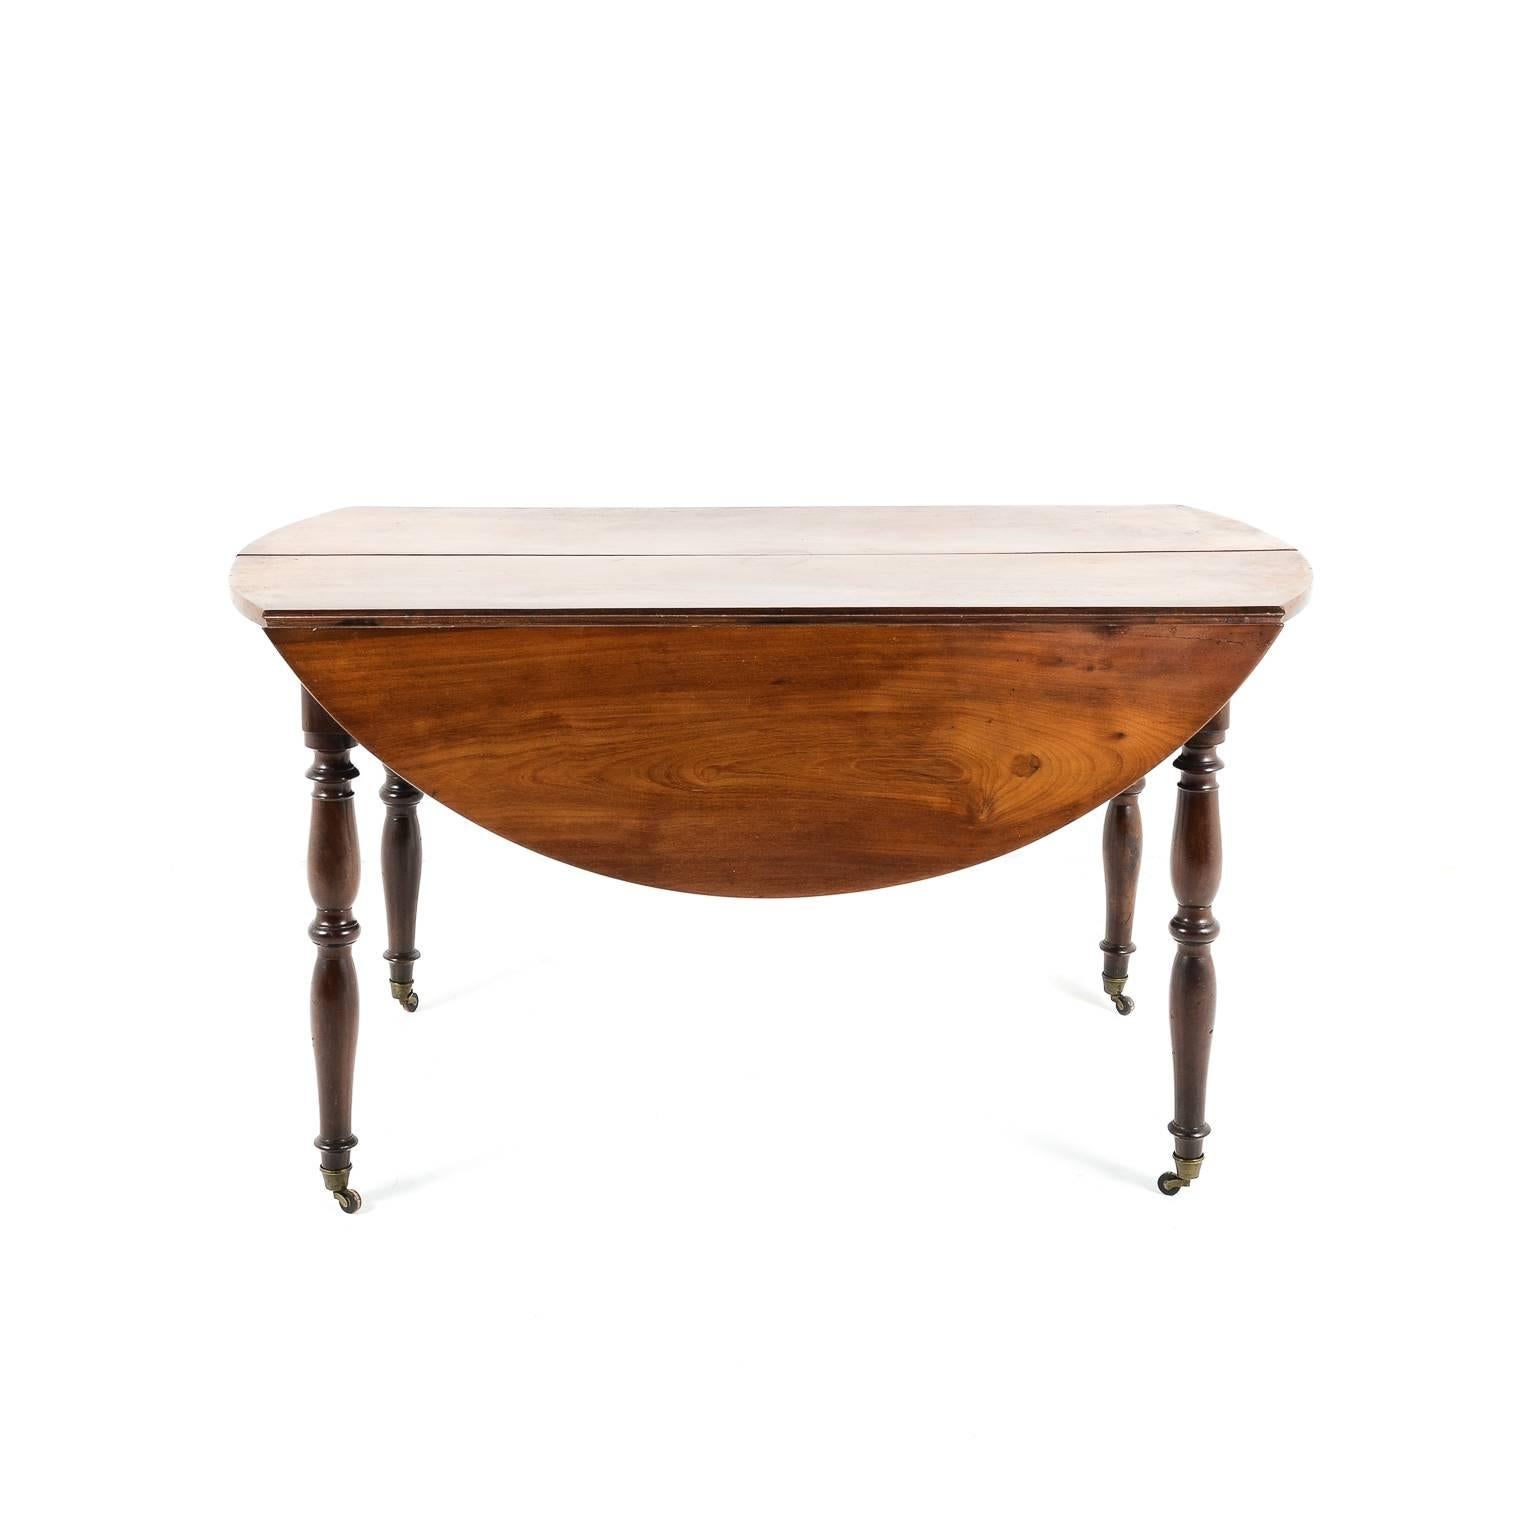 Gorgeous French polish and patina on this beautiful 19th century French fruitwood drop leaf table. Measure: 51” wide x 50” deep (leaves up) x 28” deep (leaves down) x 28.5” tall.
 